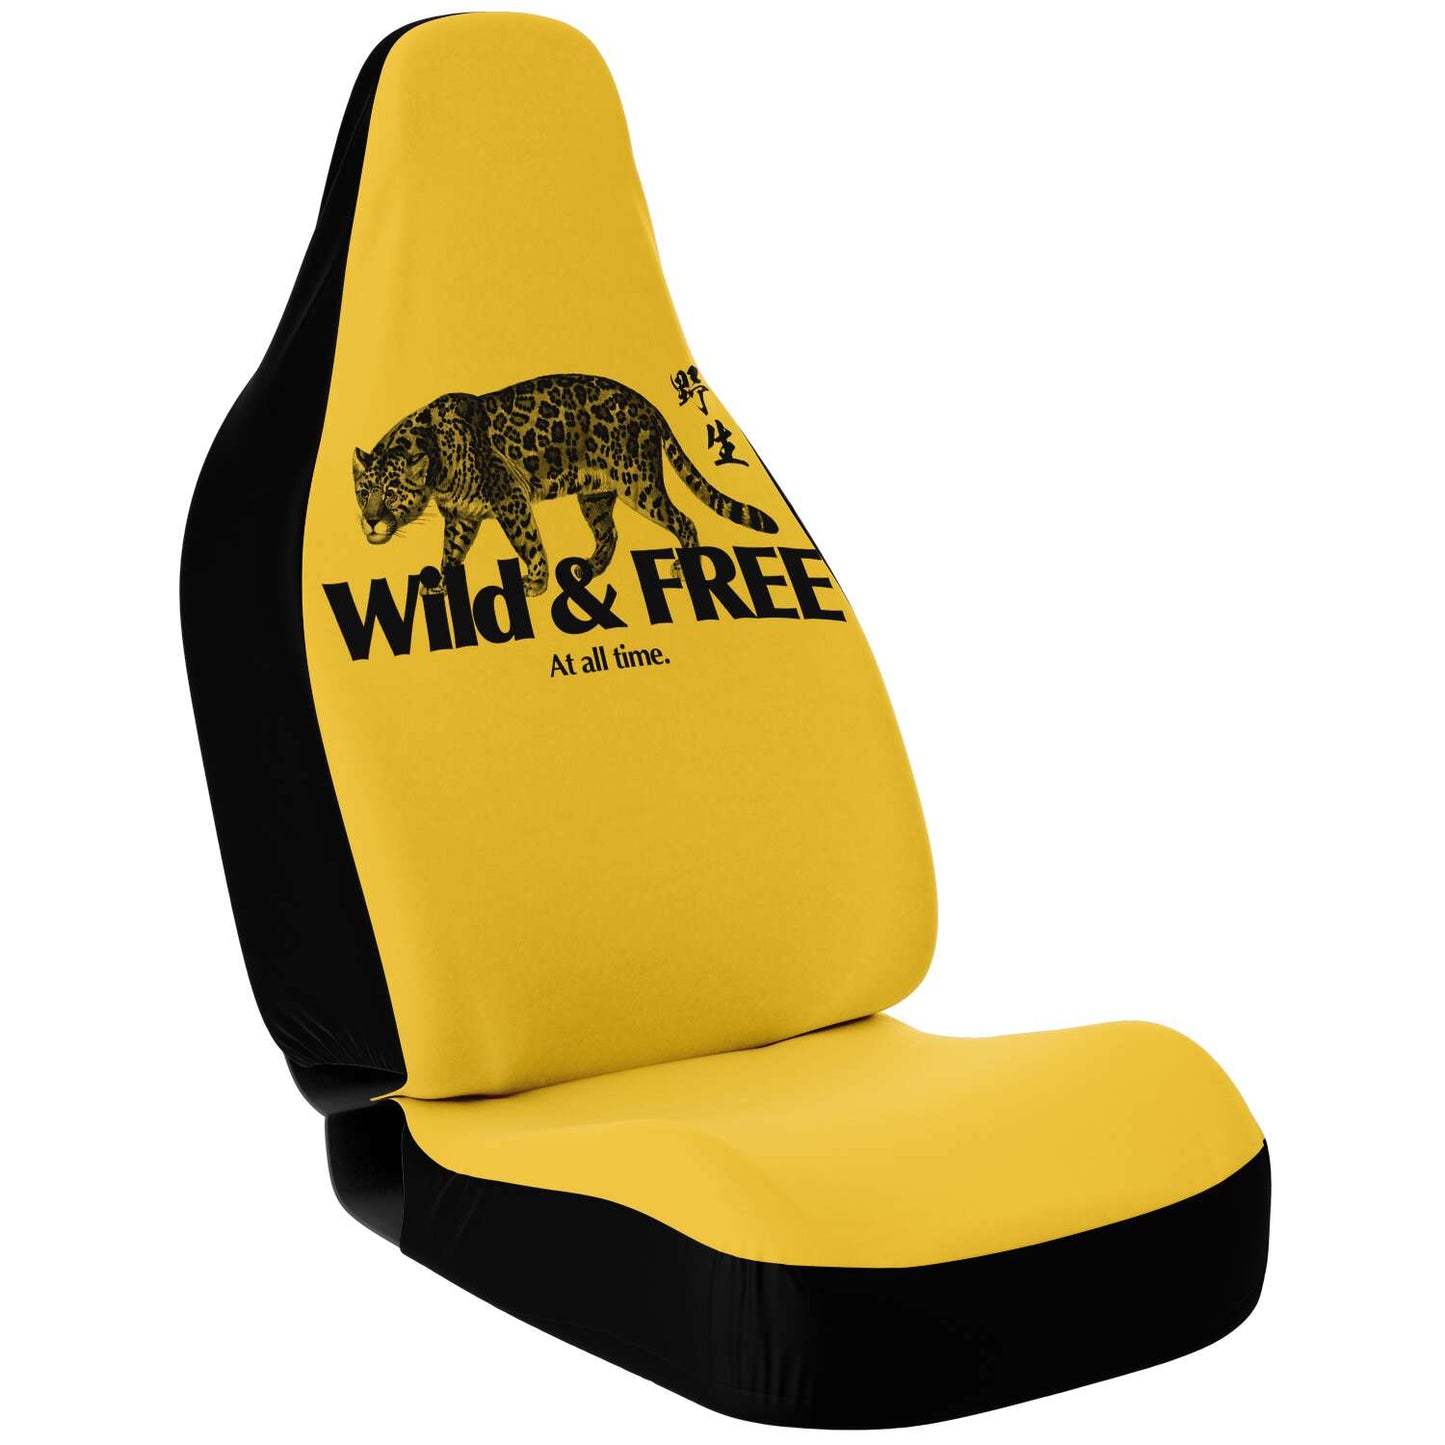 Wild & Free, at all time. 🐯 Panther Seat Covers Yellow